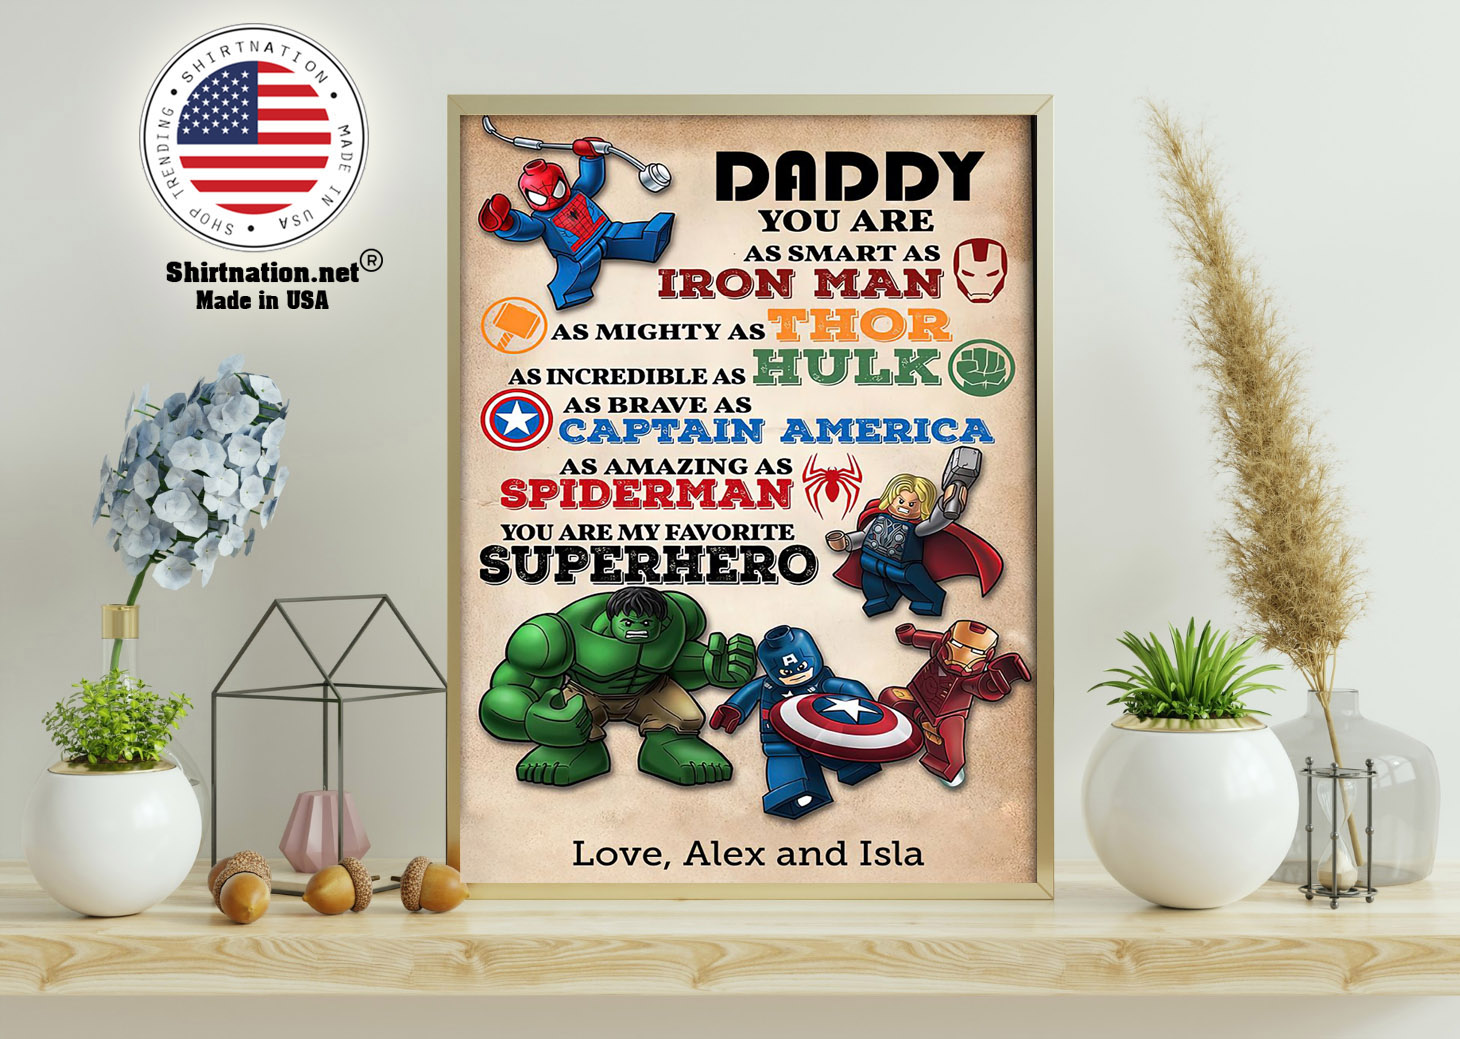 Daddy you are as smart an I ron man as mighty as thor custom name poster 11